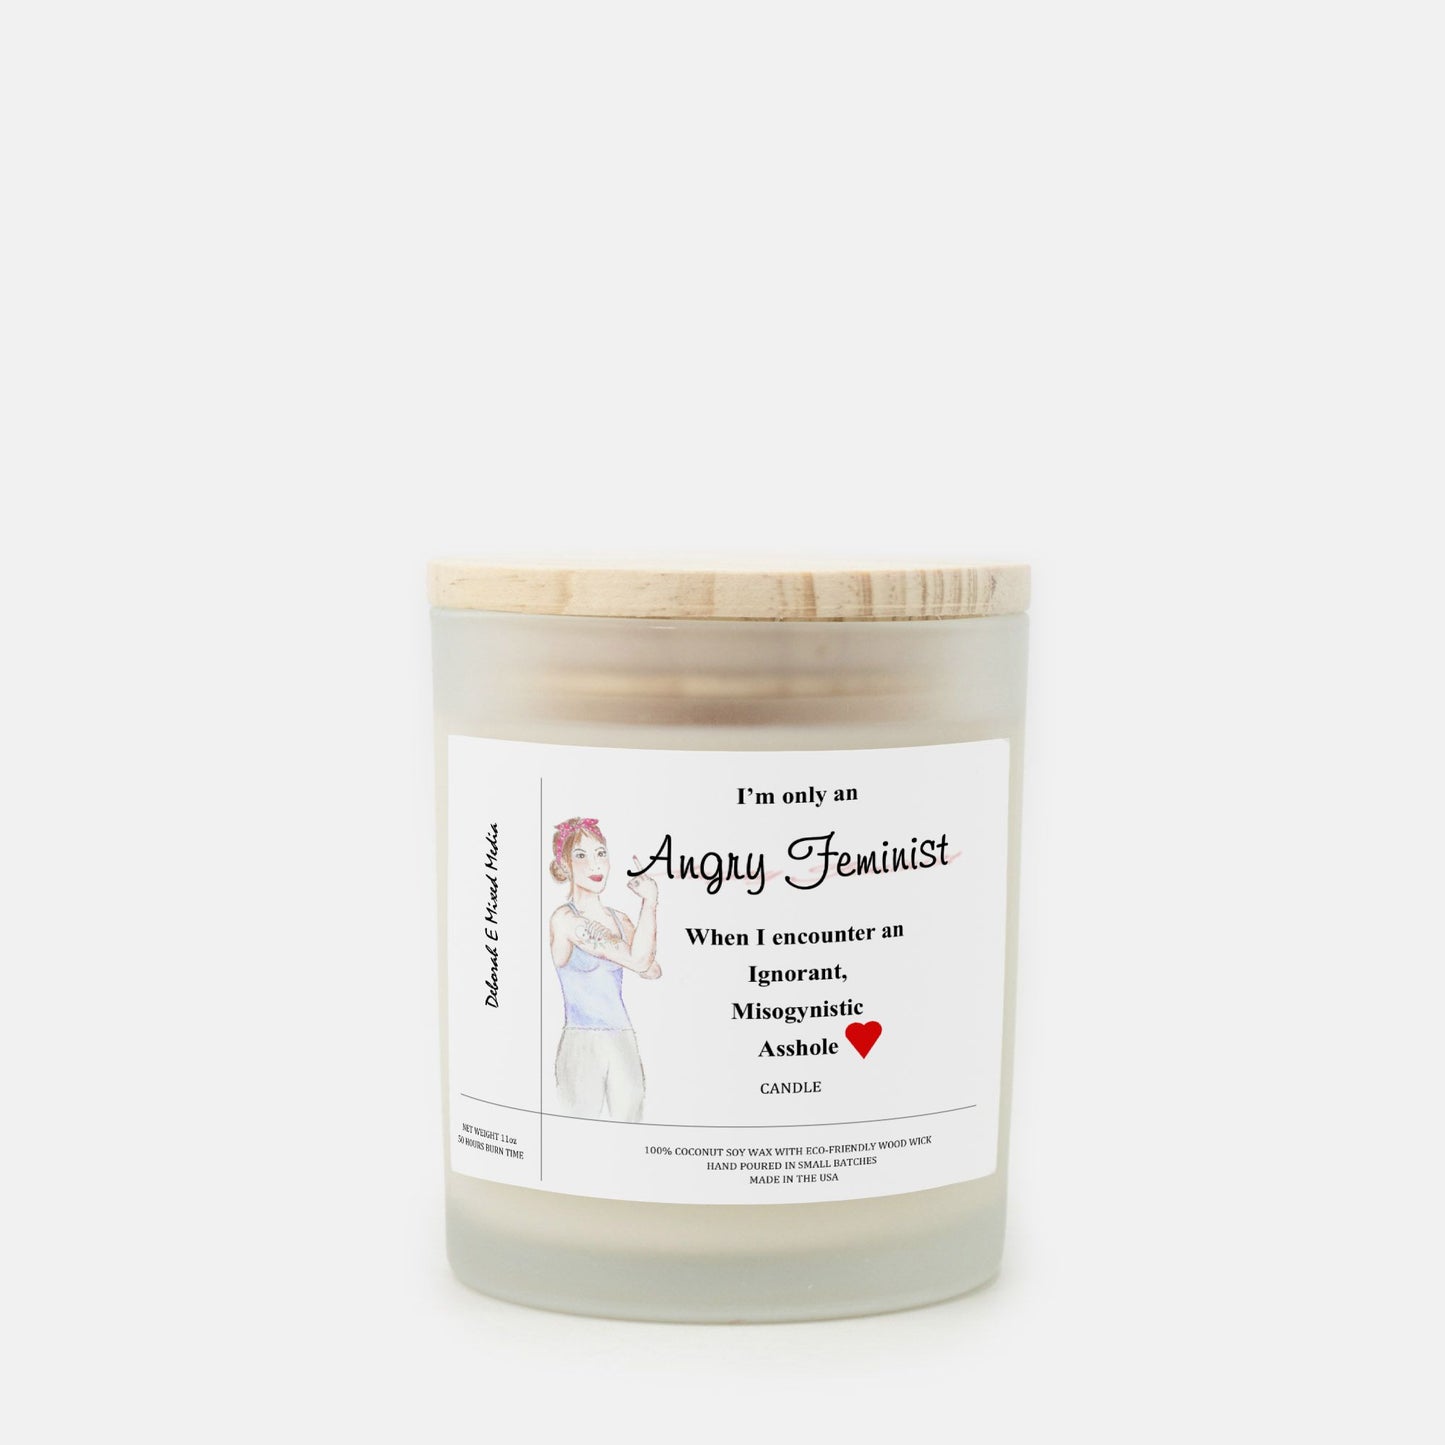 "An Angry Feminist" Frosted Glass Candle